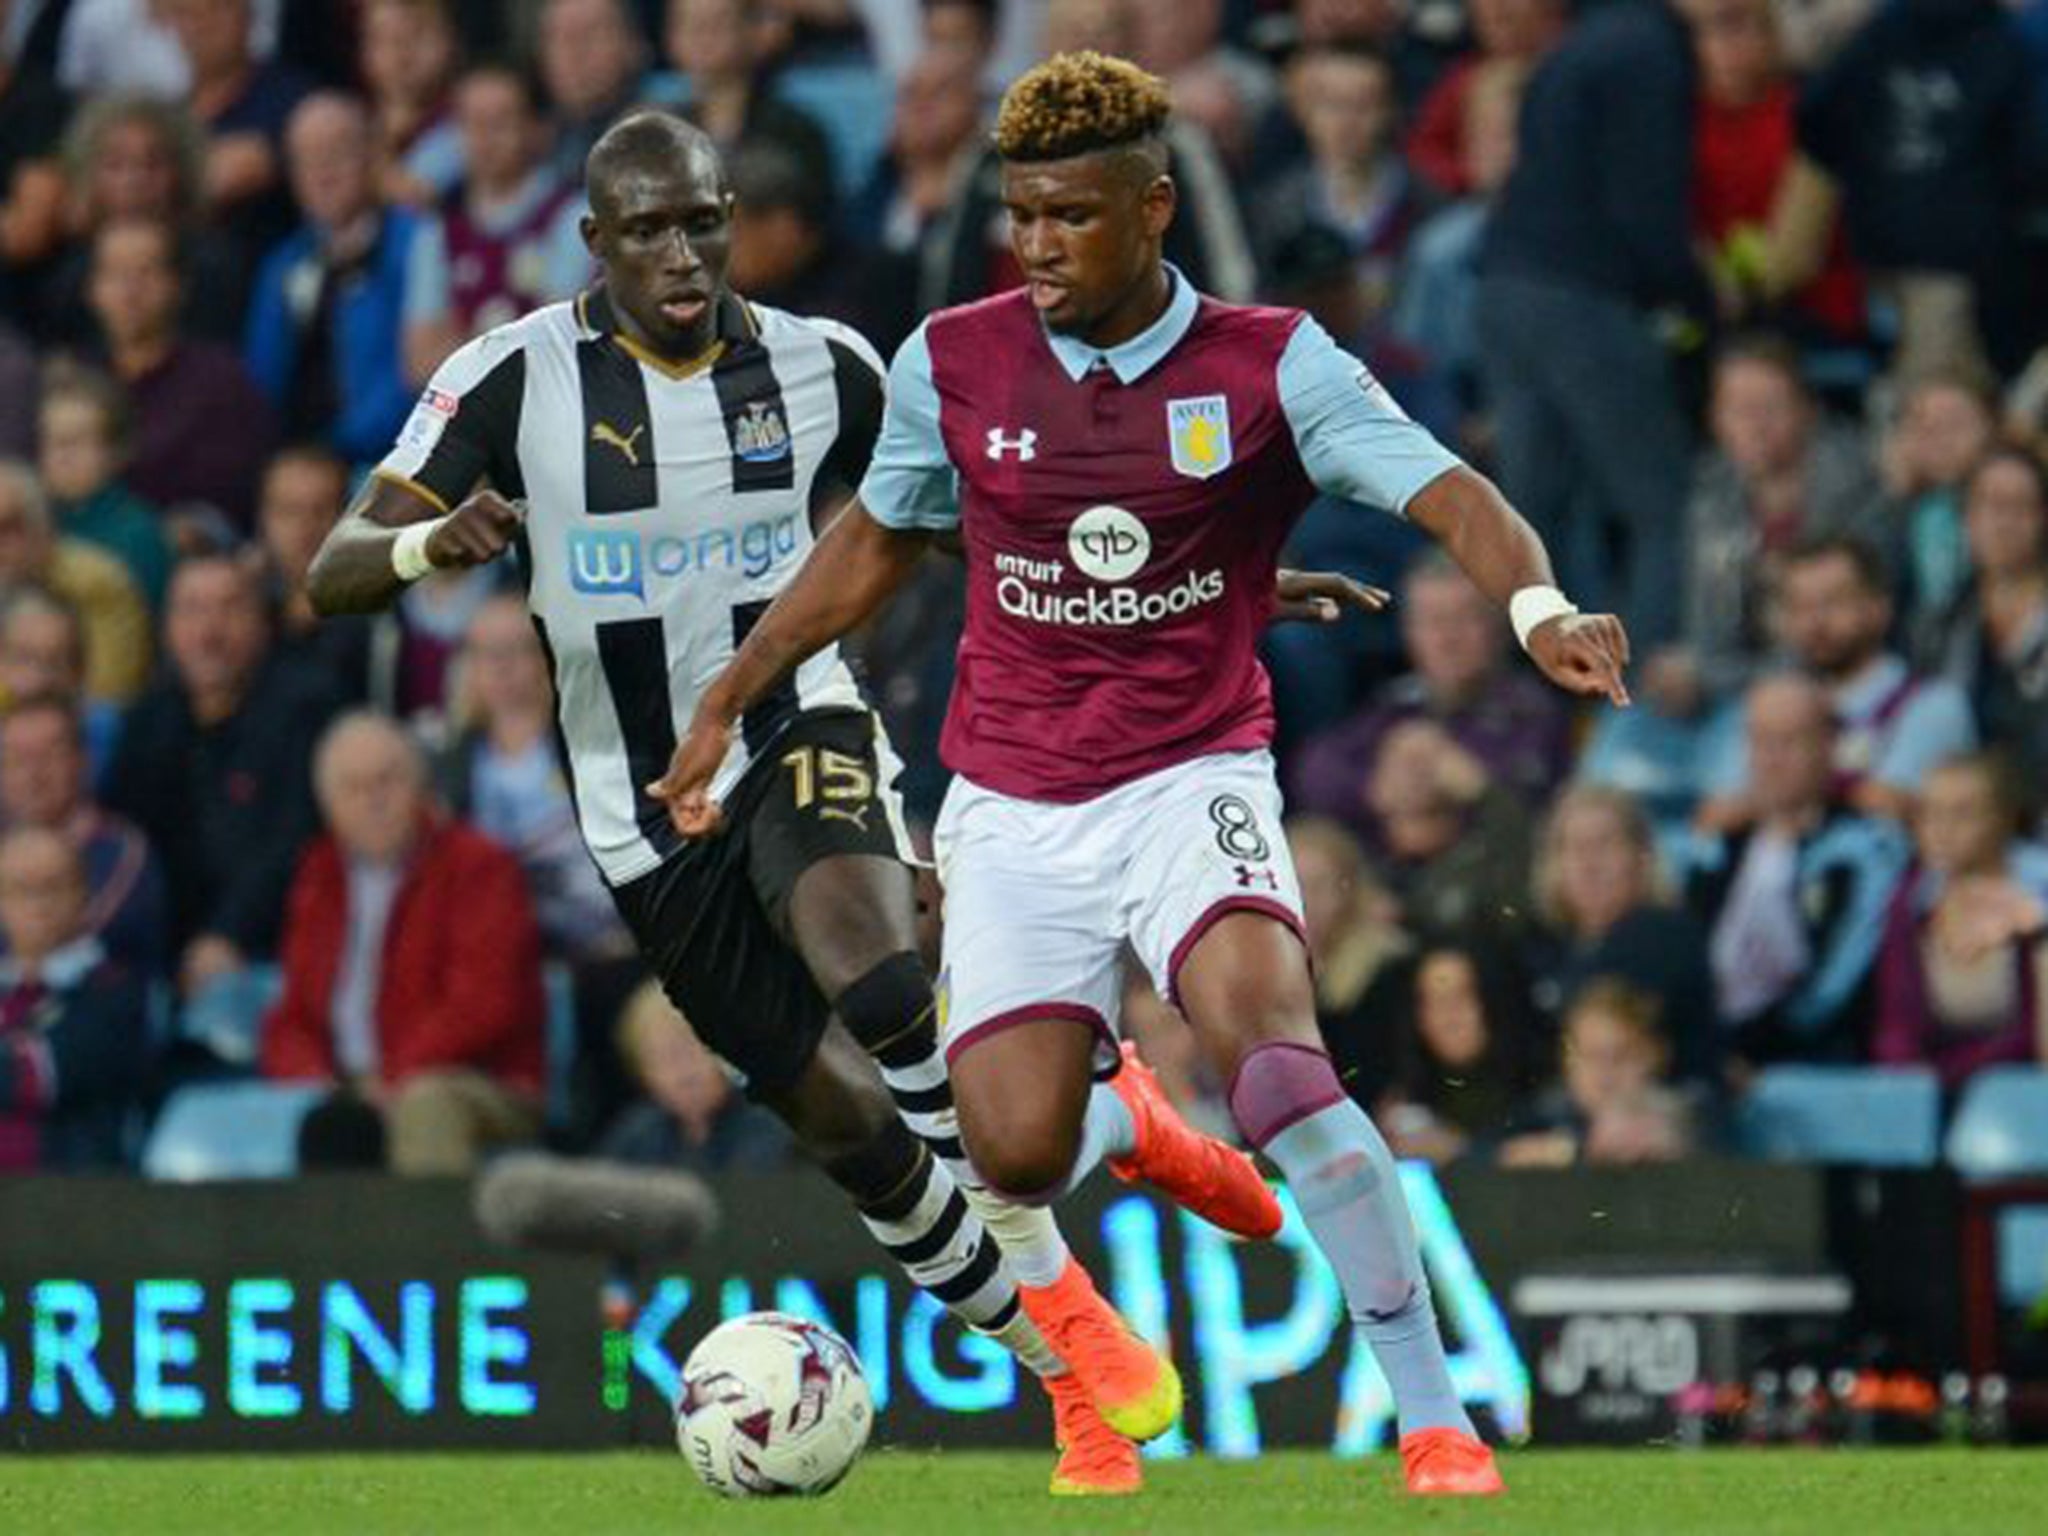 Diame and Tshibola battle for the ball